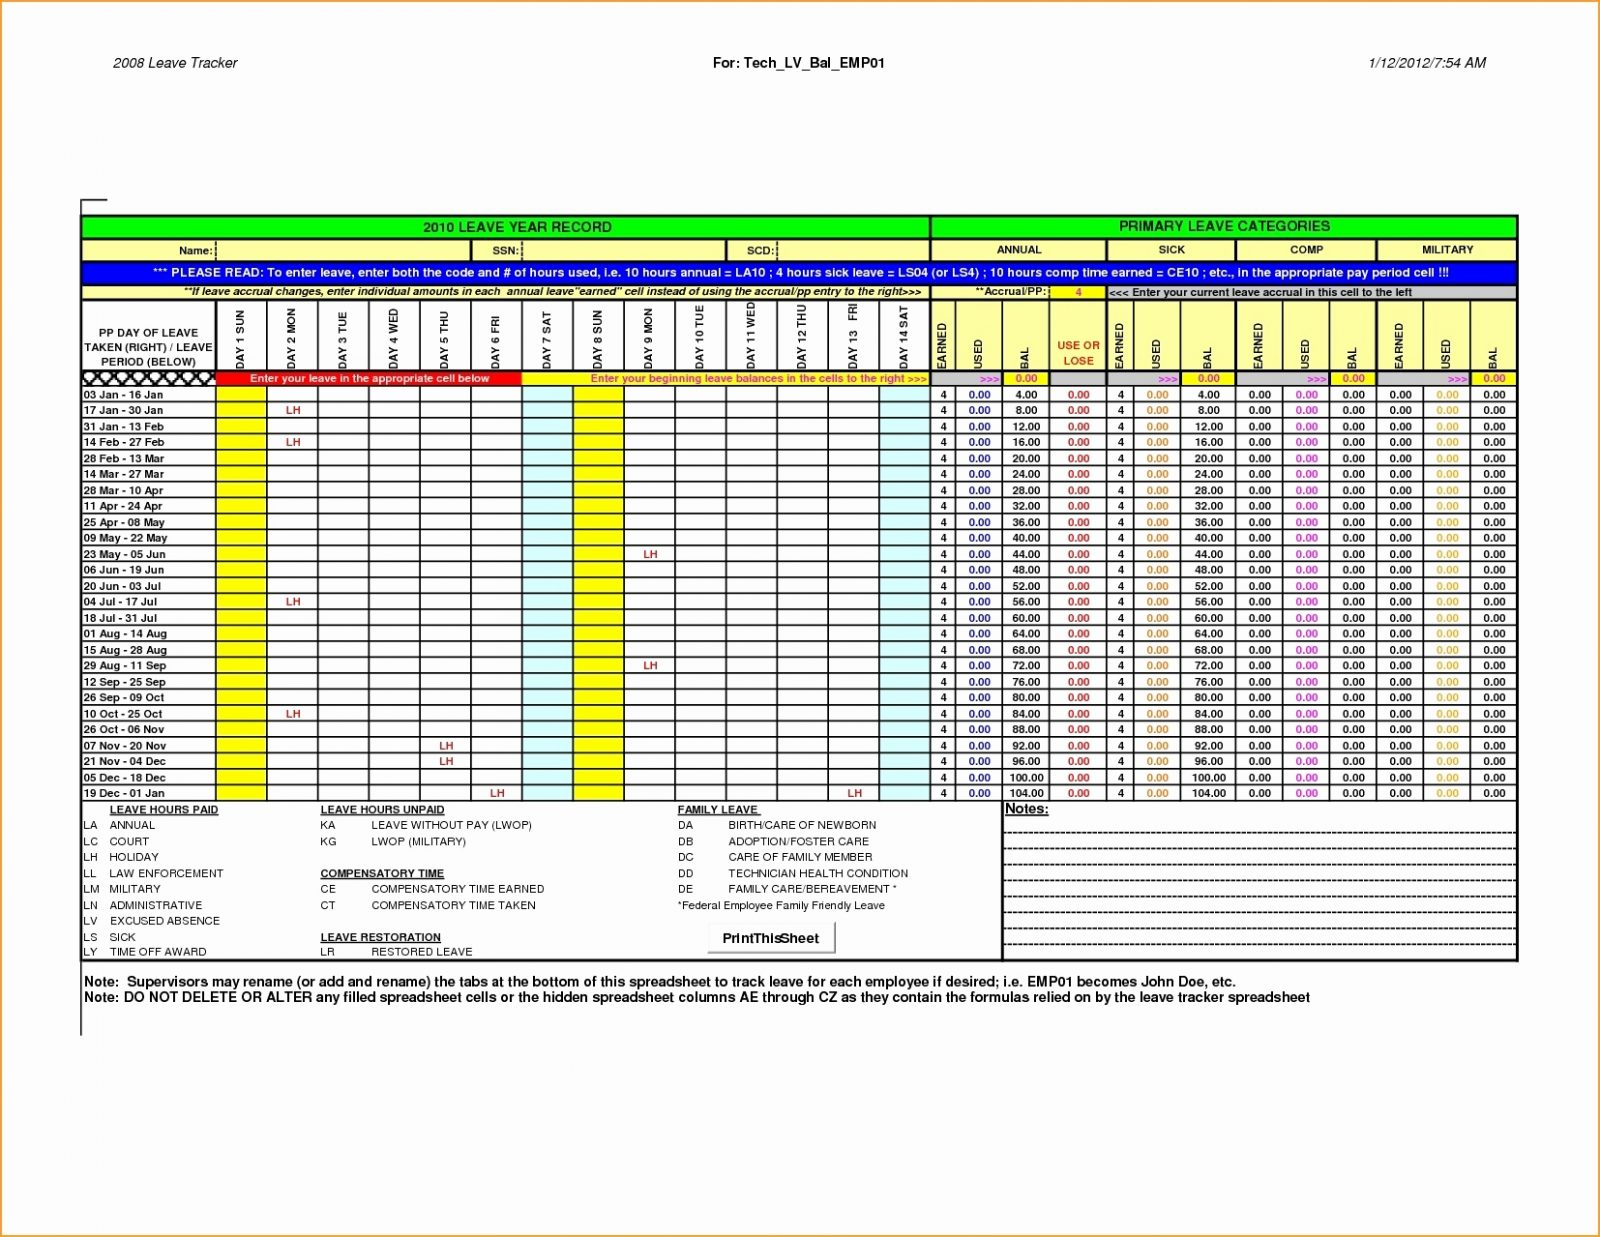 Grant Tracking Spreadsheet Excel Within Grant Tracking Spreadsheetlate Elegant Fresh Pics Excel  Askoverflow